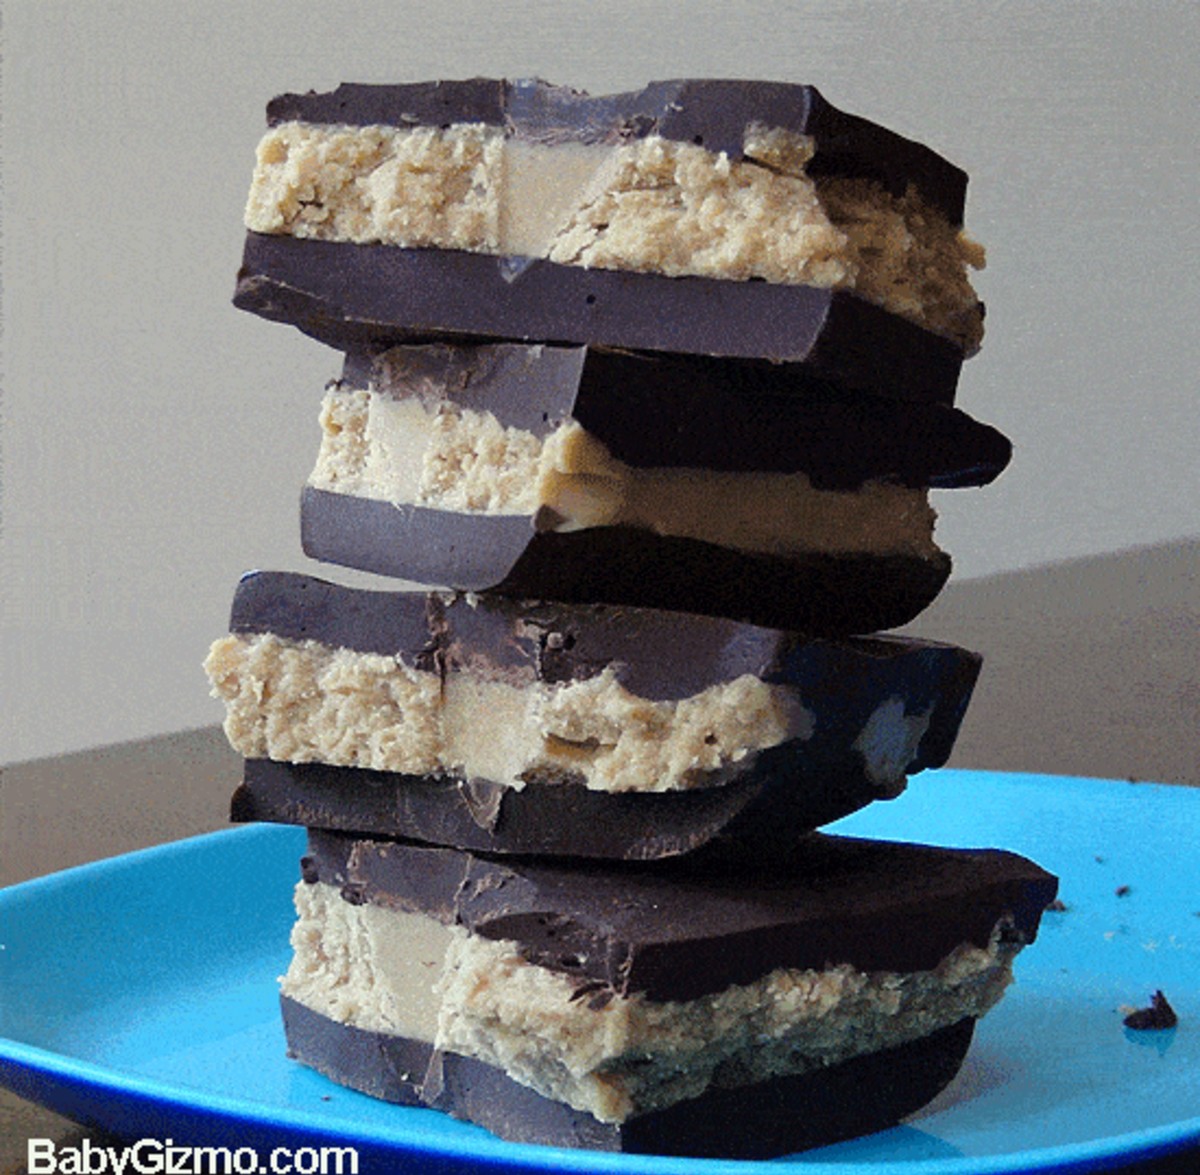 Peanut butter cup bark stacked on a blue plate